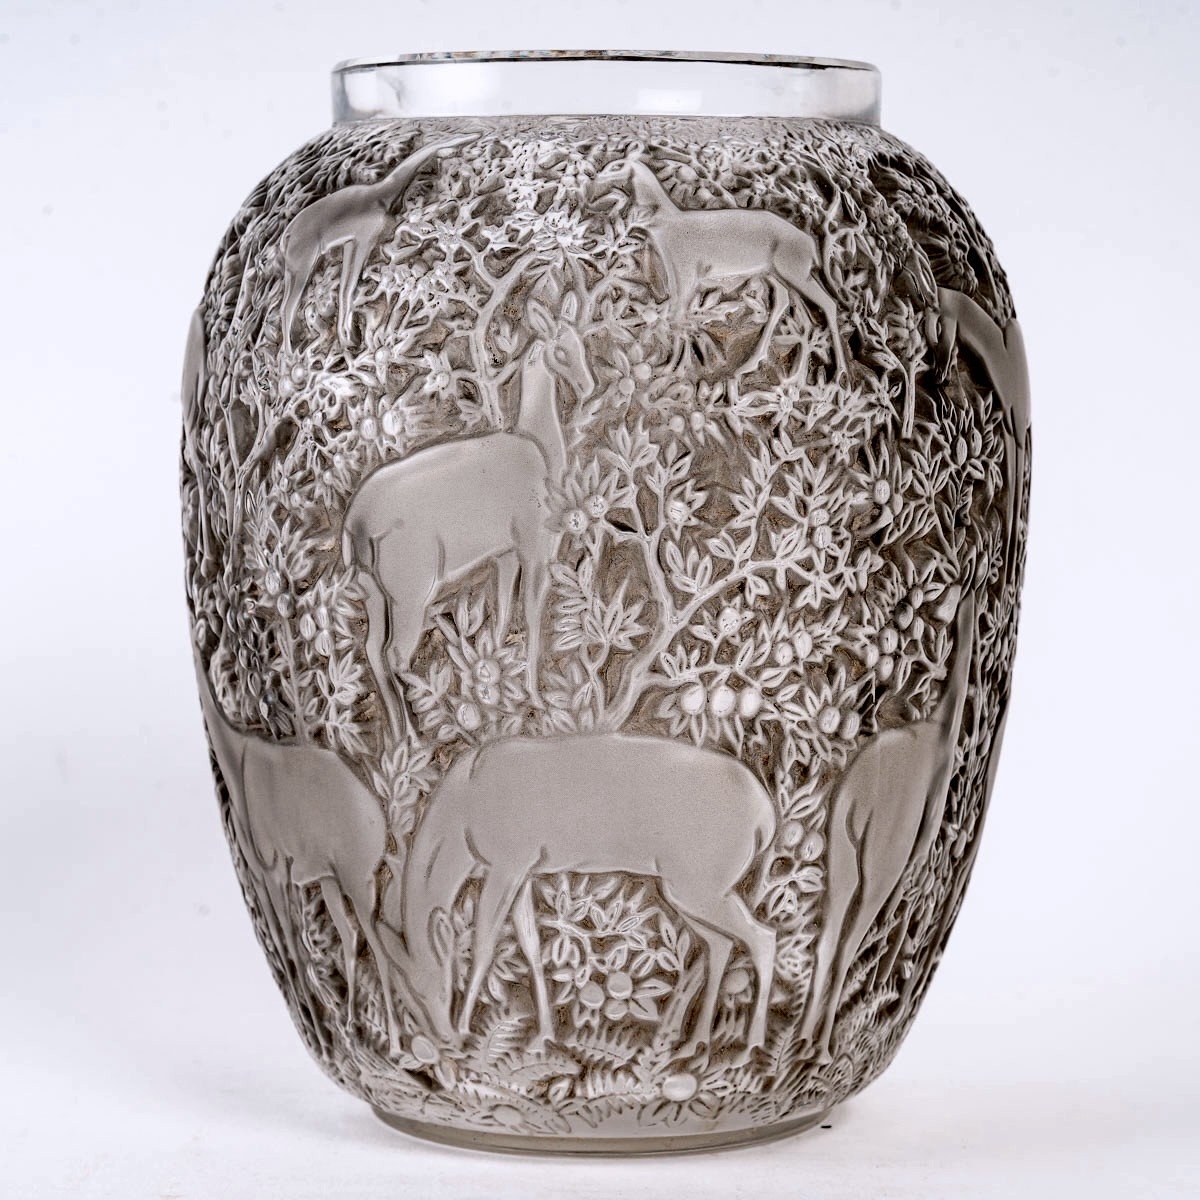 1932 Rene Lalique - Vase Biches Frosted Glass With Grey Patina